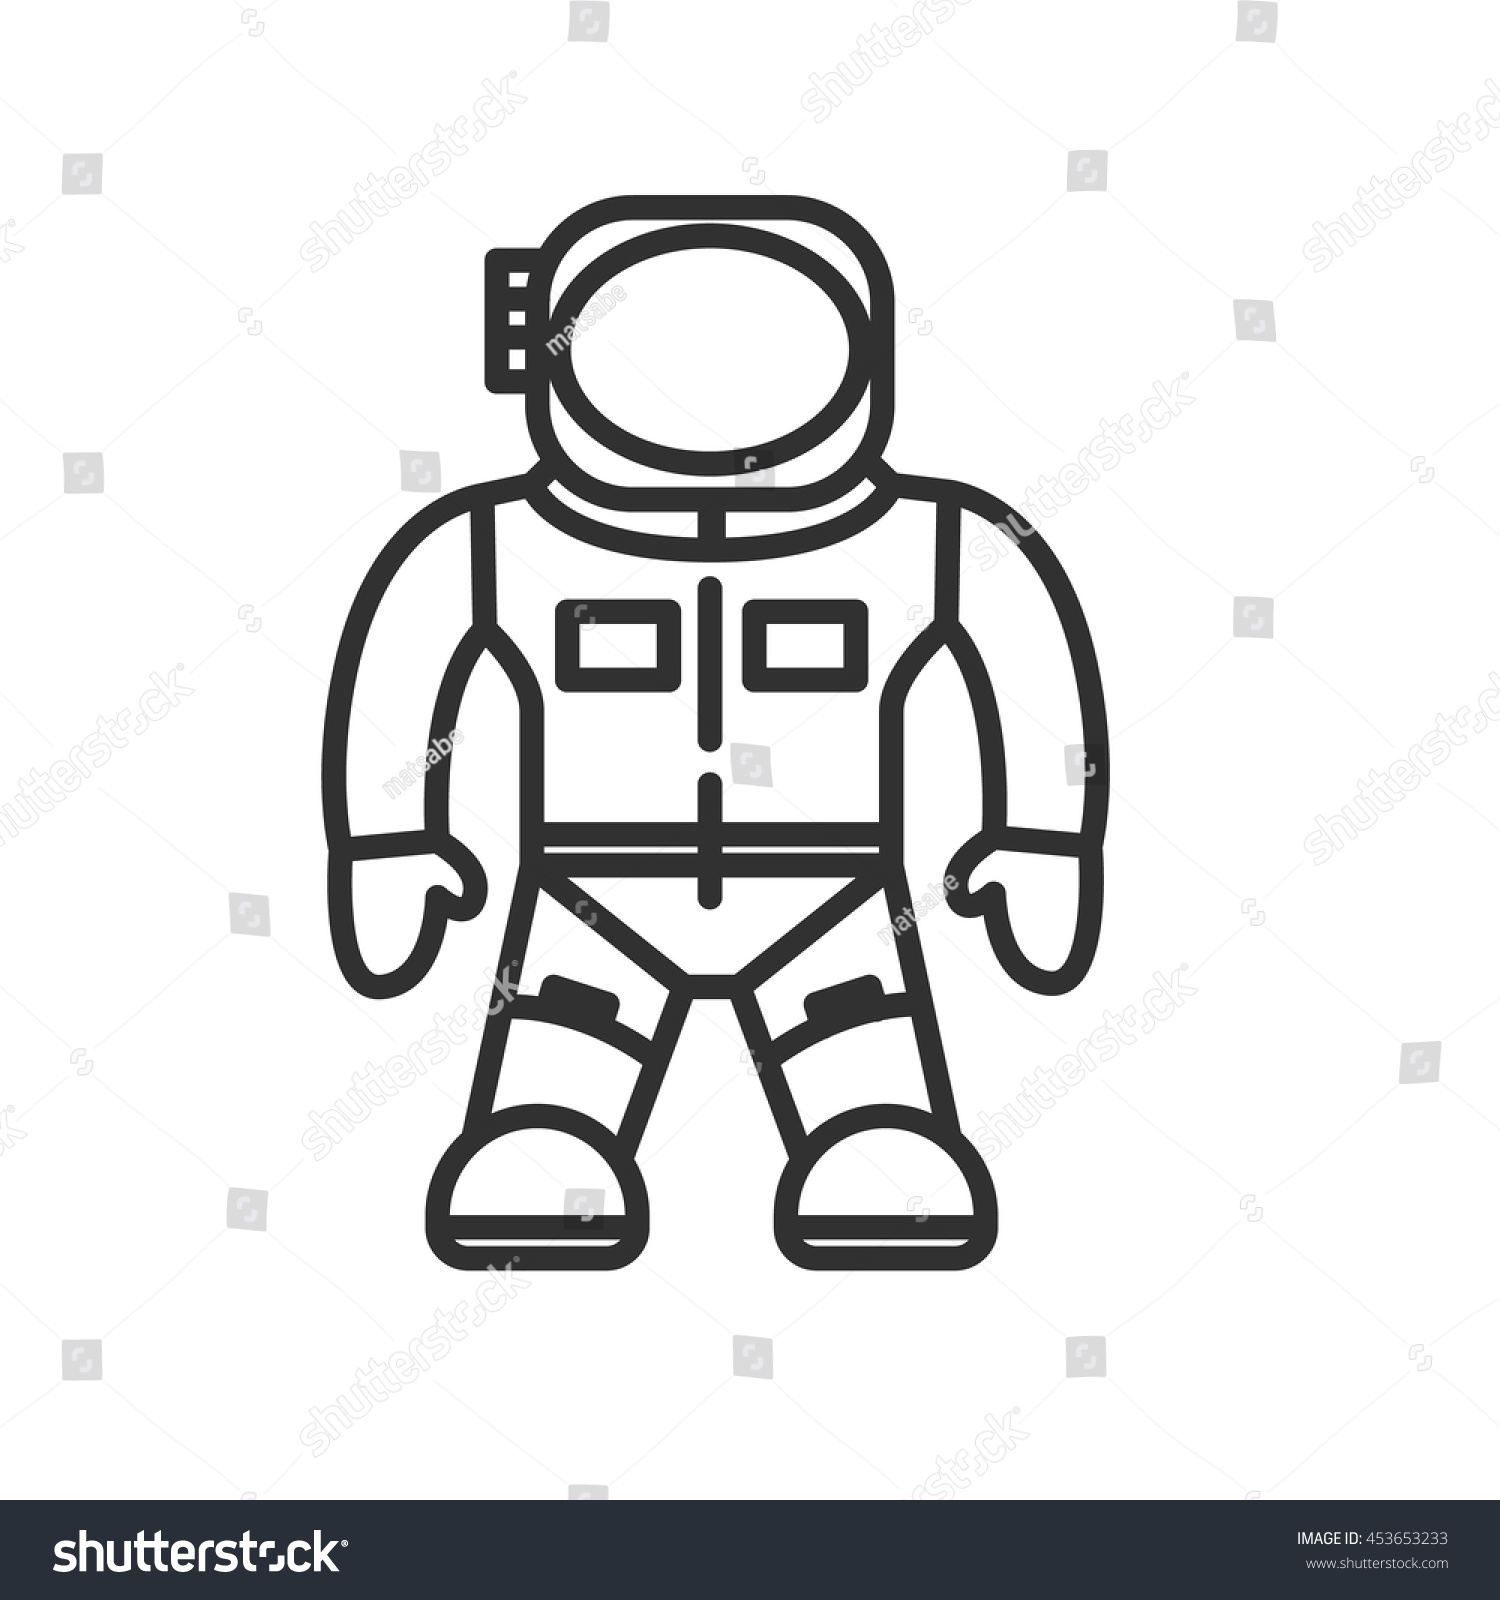 Simple black icon of cosmonaut or astronaut wearing space suit 